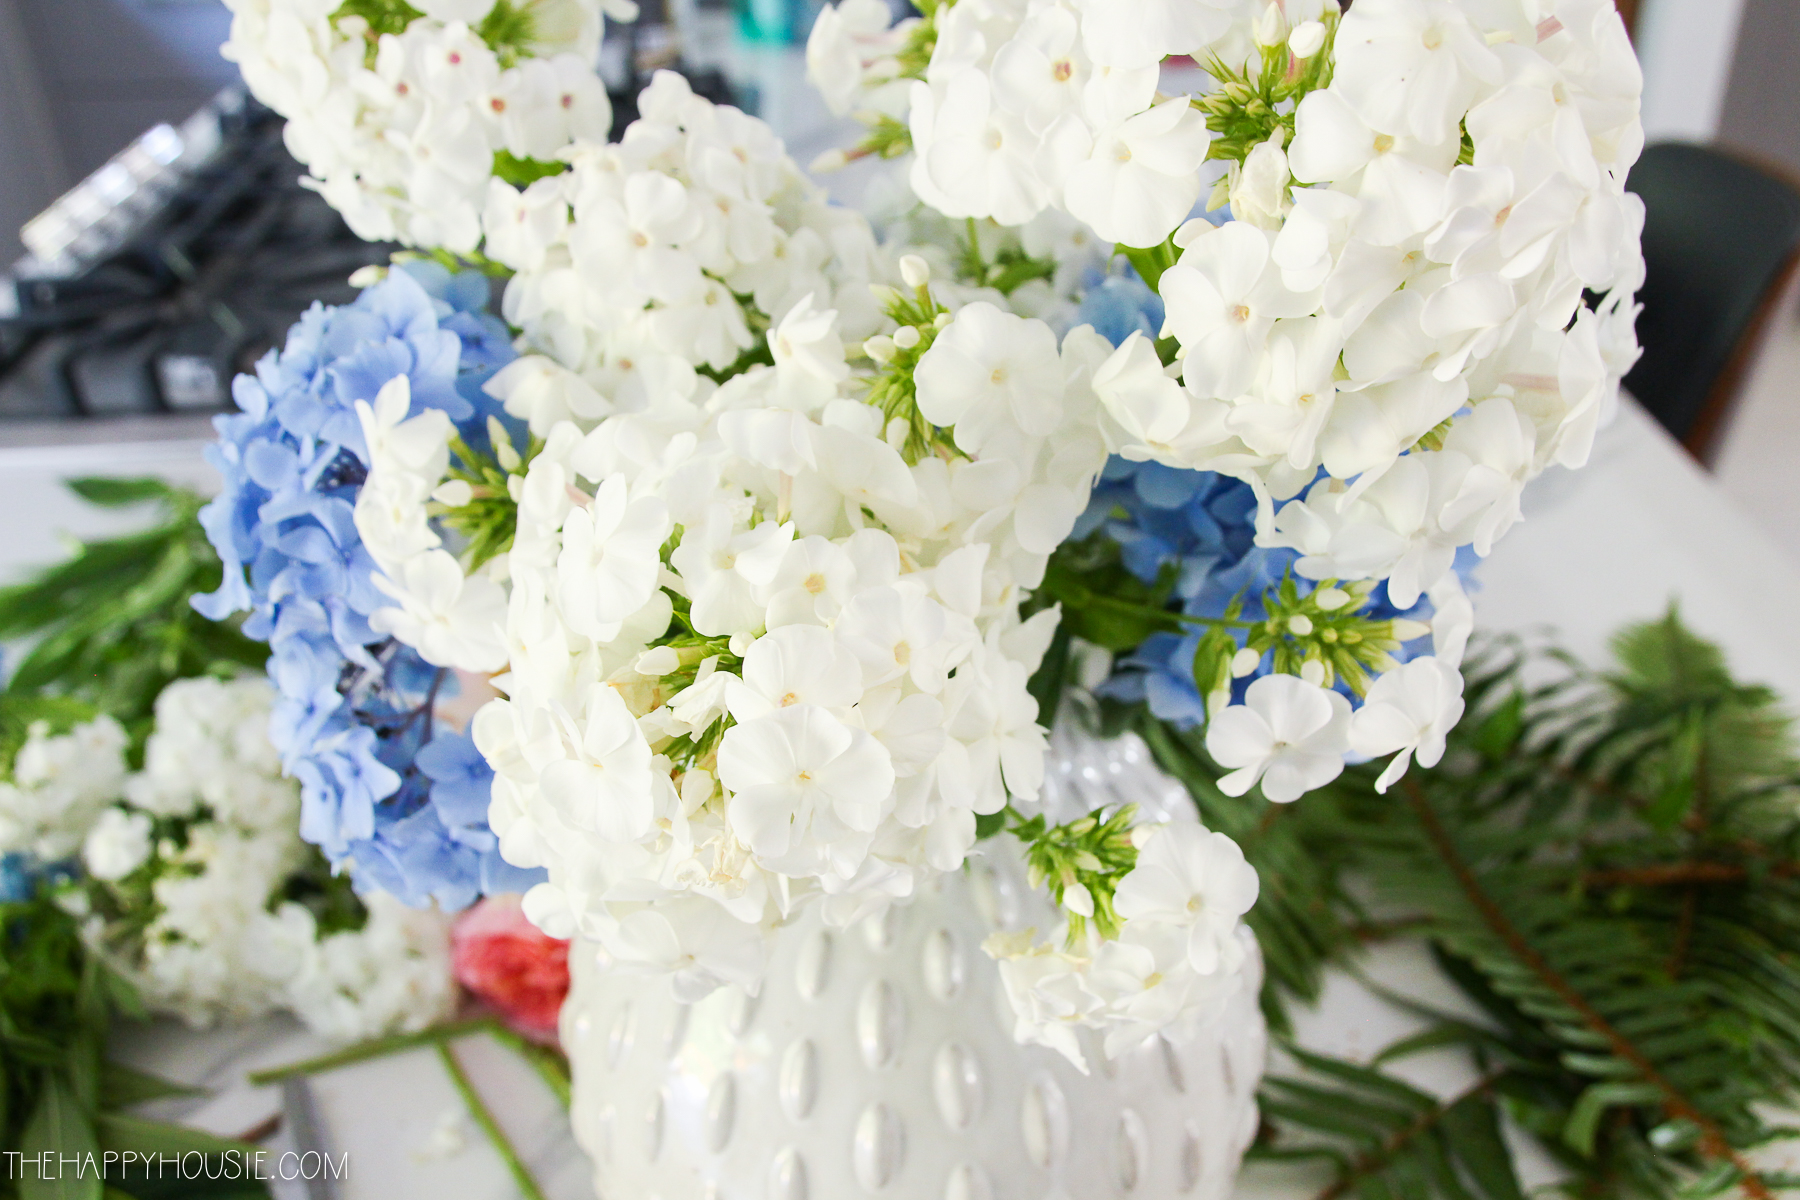 Layering white hydrangeas in between the blue ones in the white vase.